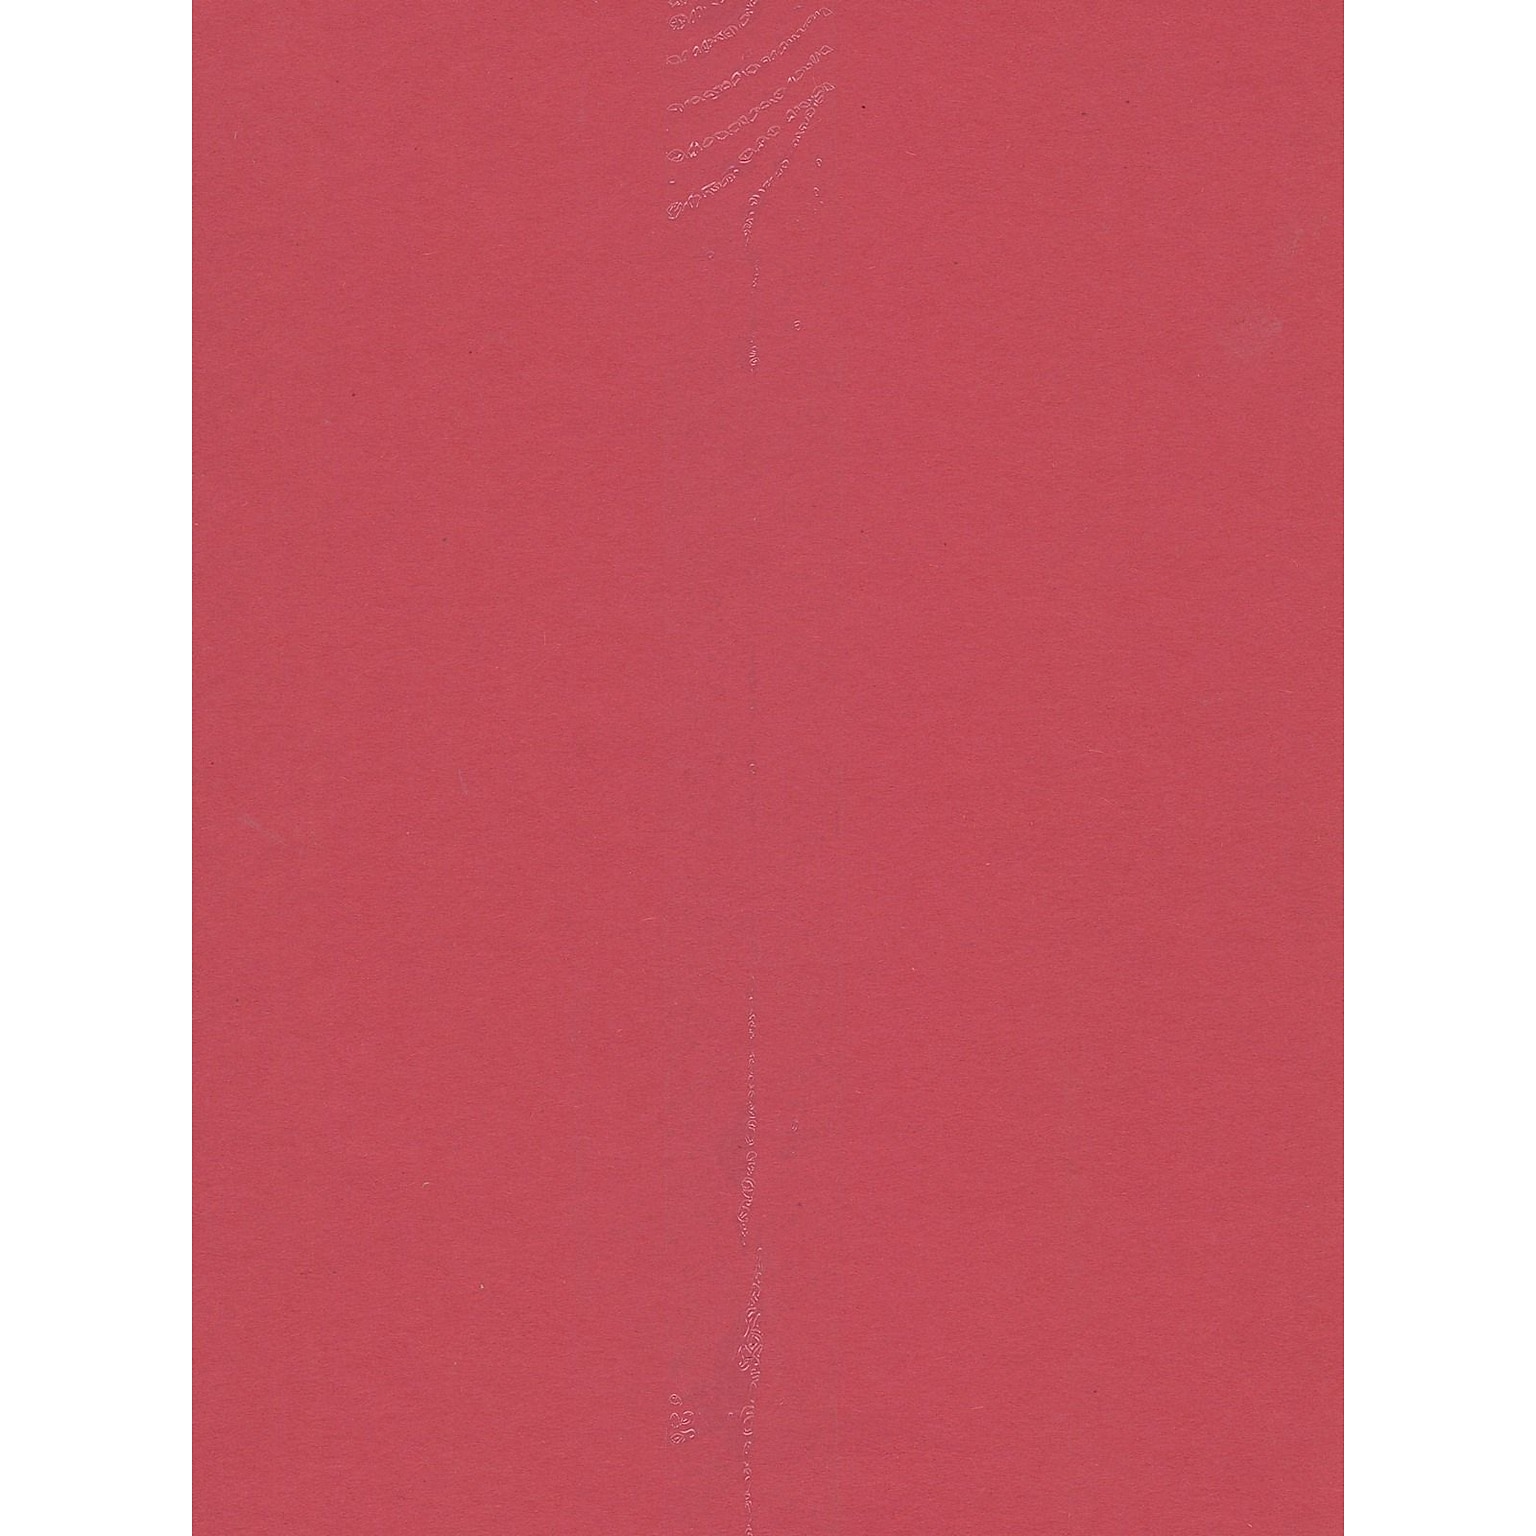 Pacon 12 x 18 Construction Paper, Holiday Red, 50 Sheets/Pack, 5/Pack (75007-PK5)